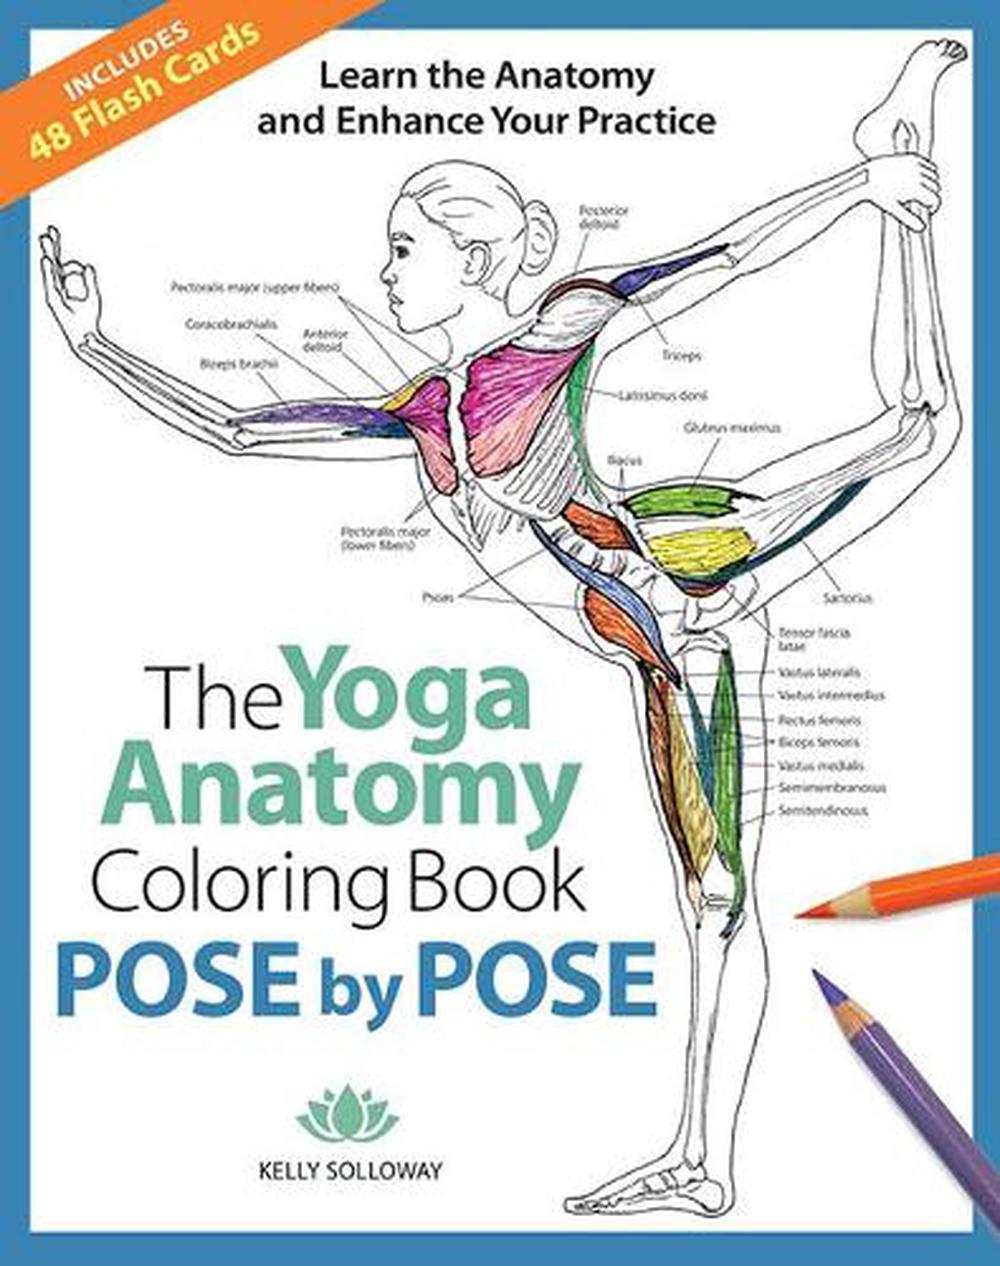 Download Yoga Anatomy Coloring Pose by Pose by Kelly Solloway (English) Paperback Book Fr 9781684620135 ...